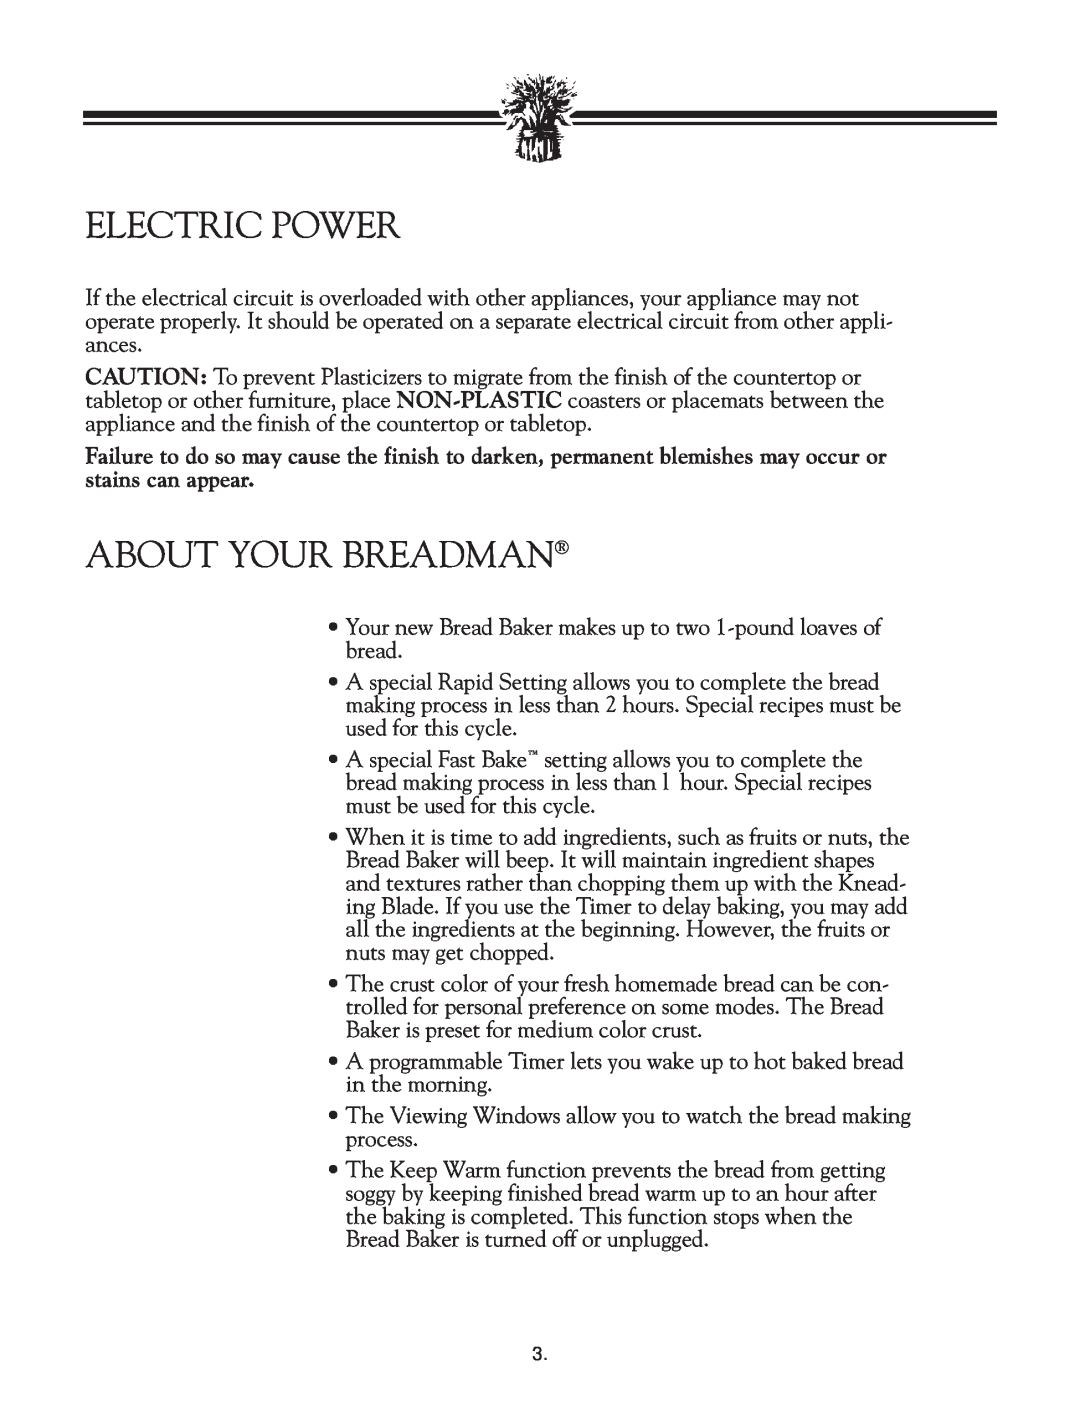 Breadman TR2828G instruction manual Electric Power, About Your Breadman 